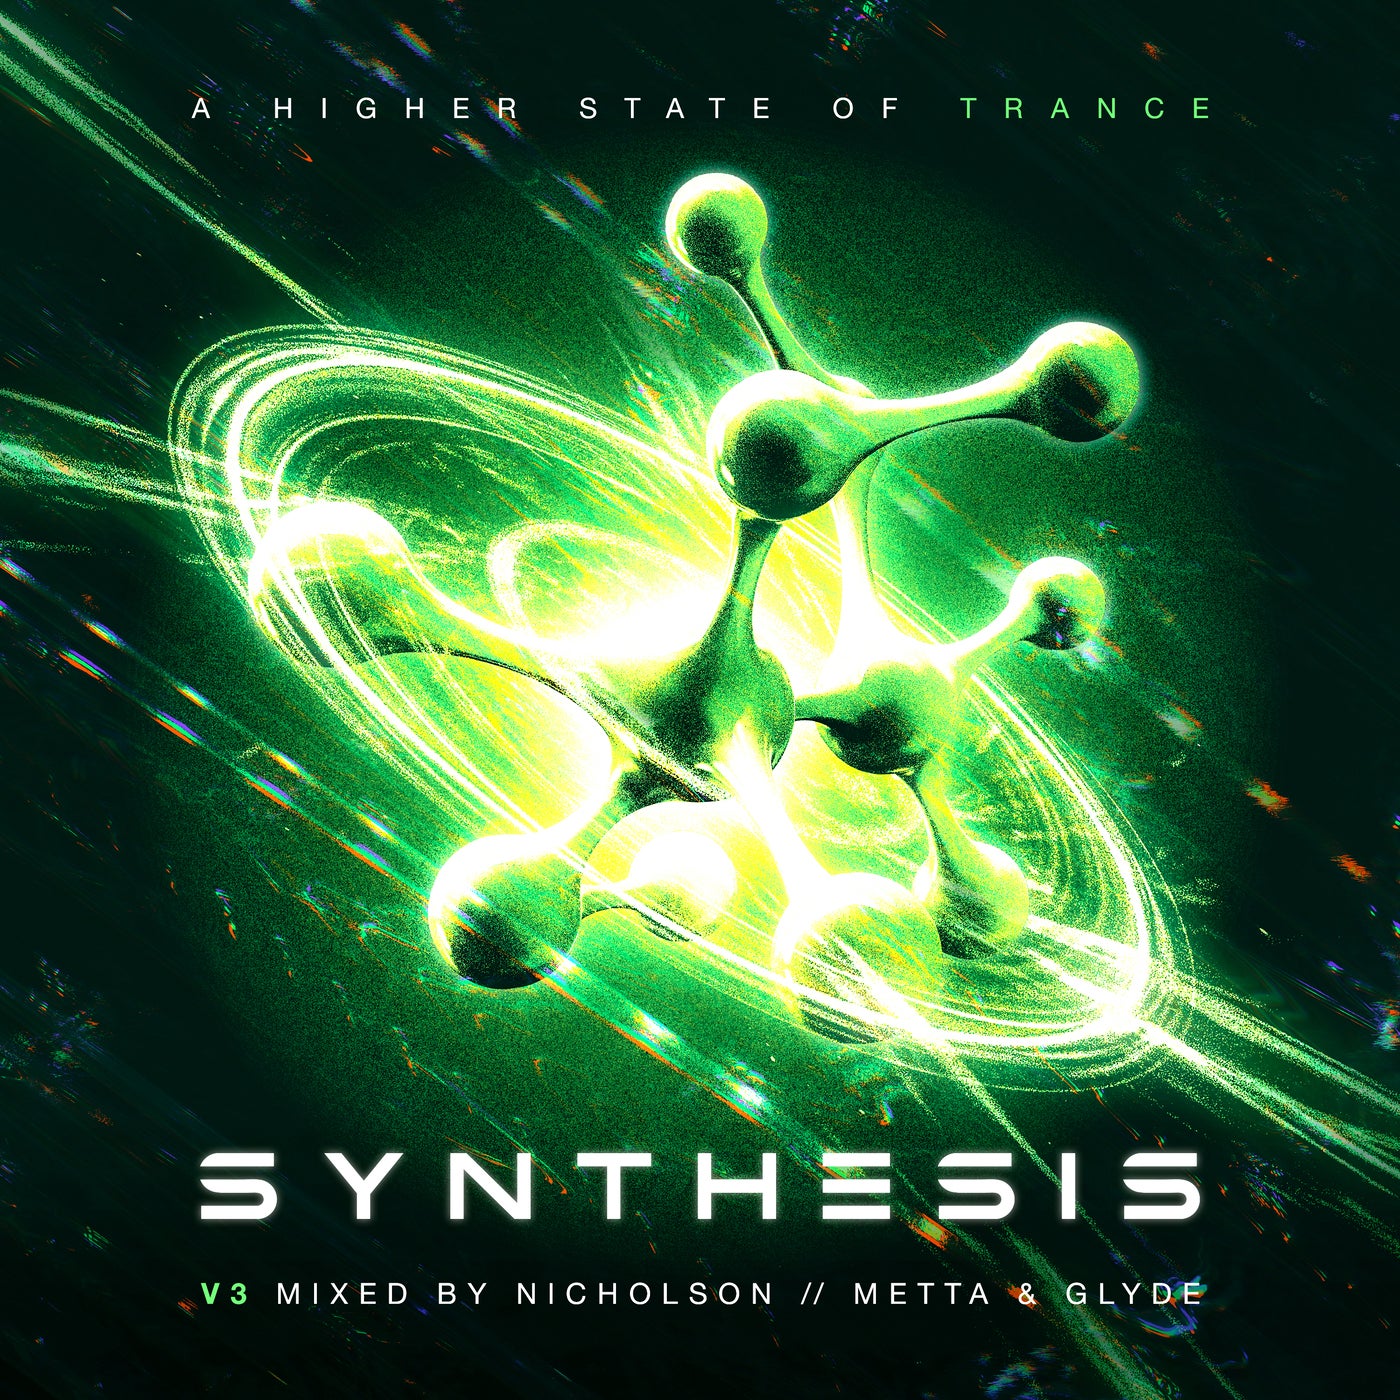 Synthesis, Vol. 3